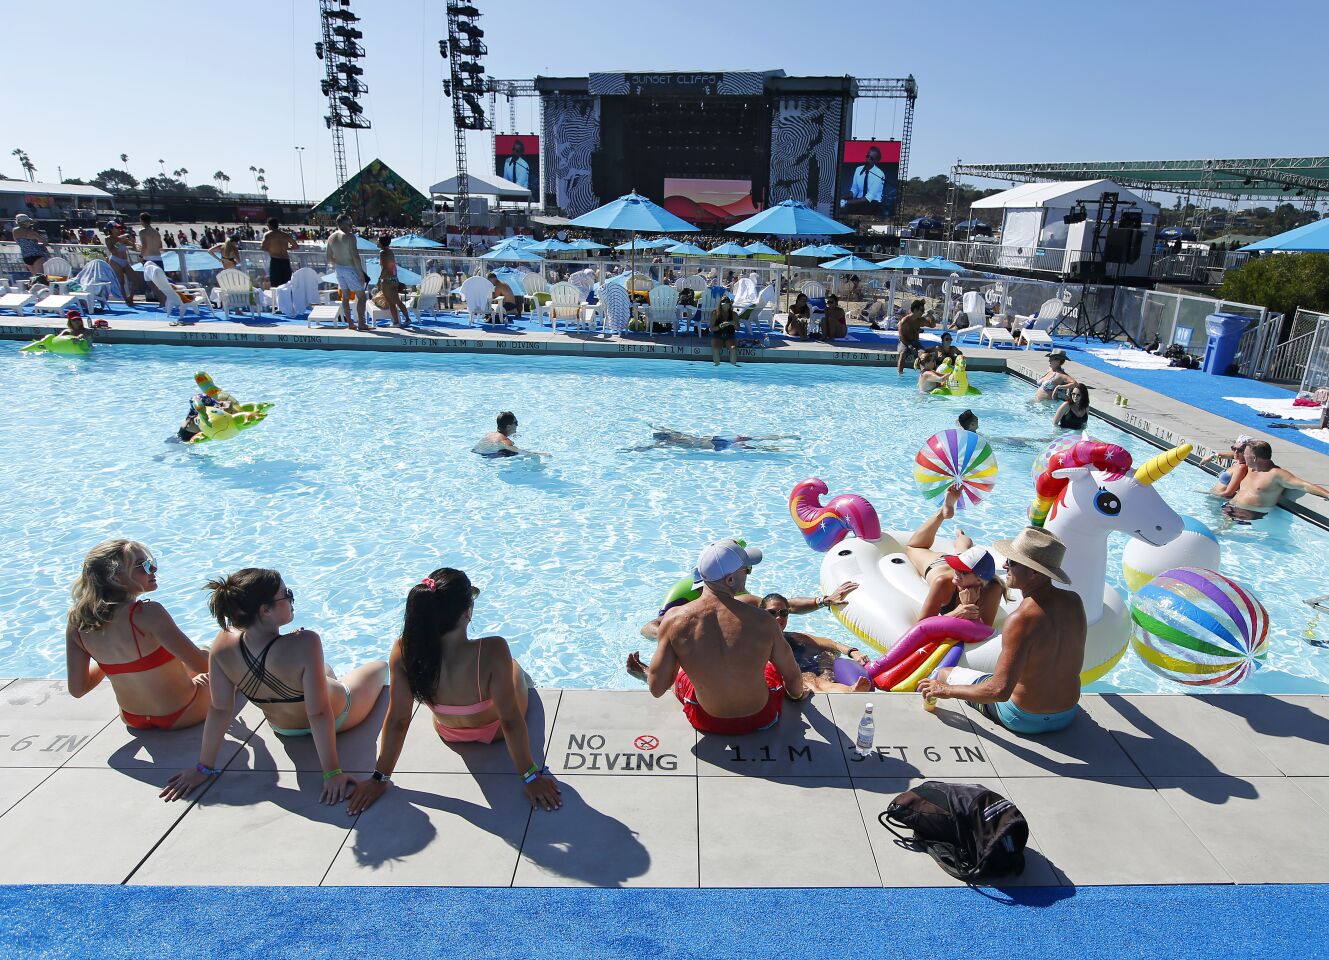 Concert goers relax at the Bask Swim Club at KAABOO Del Mar at Andrew McMahon played on Sept. 13, 2019.